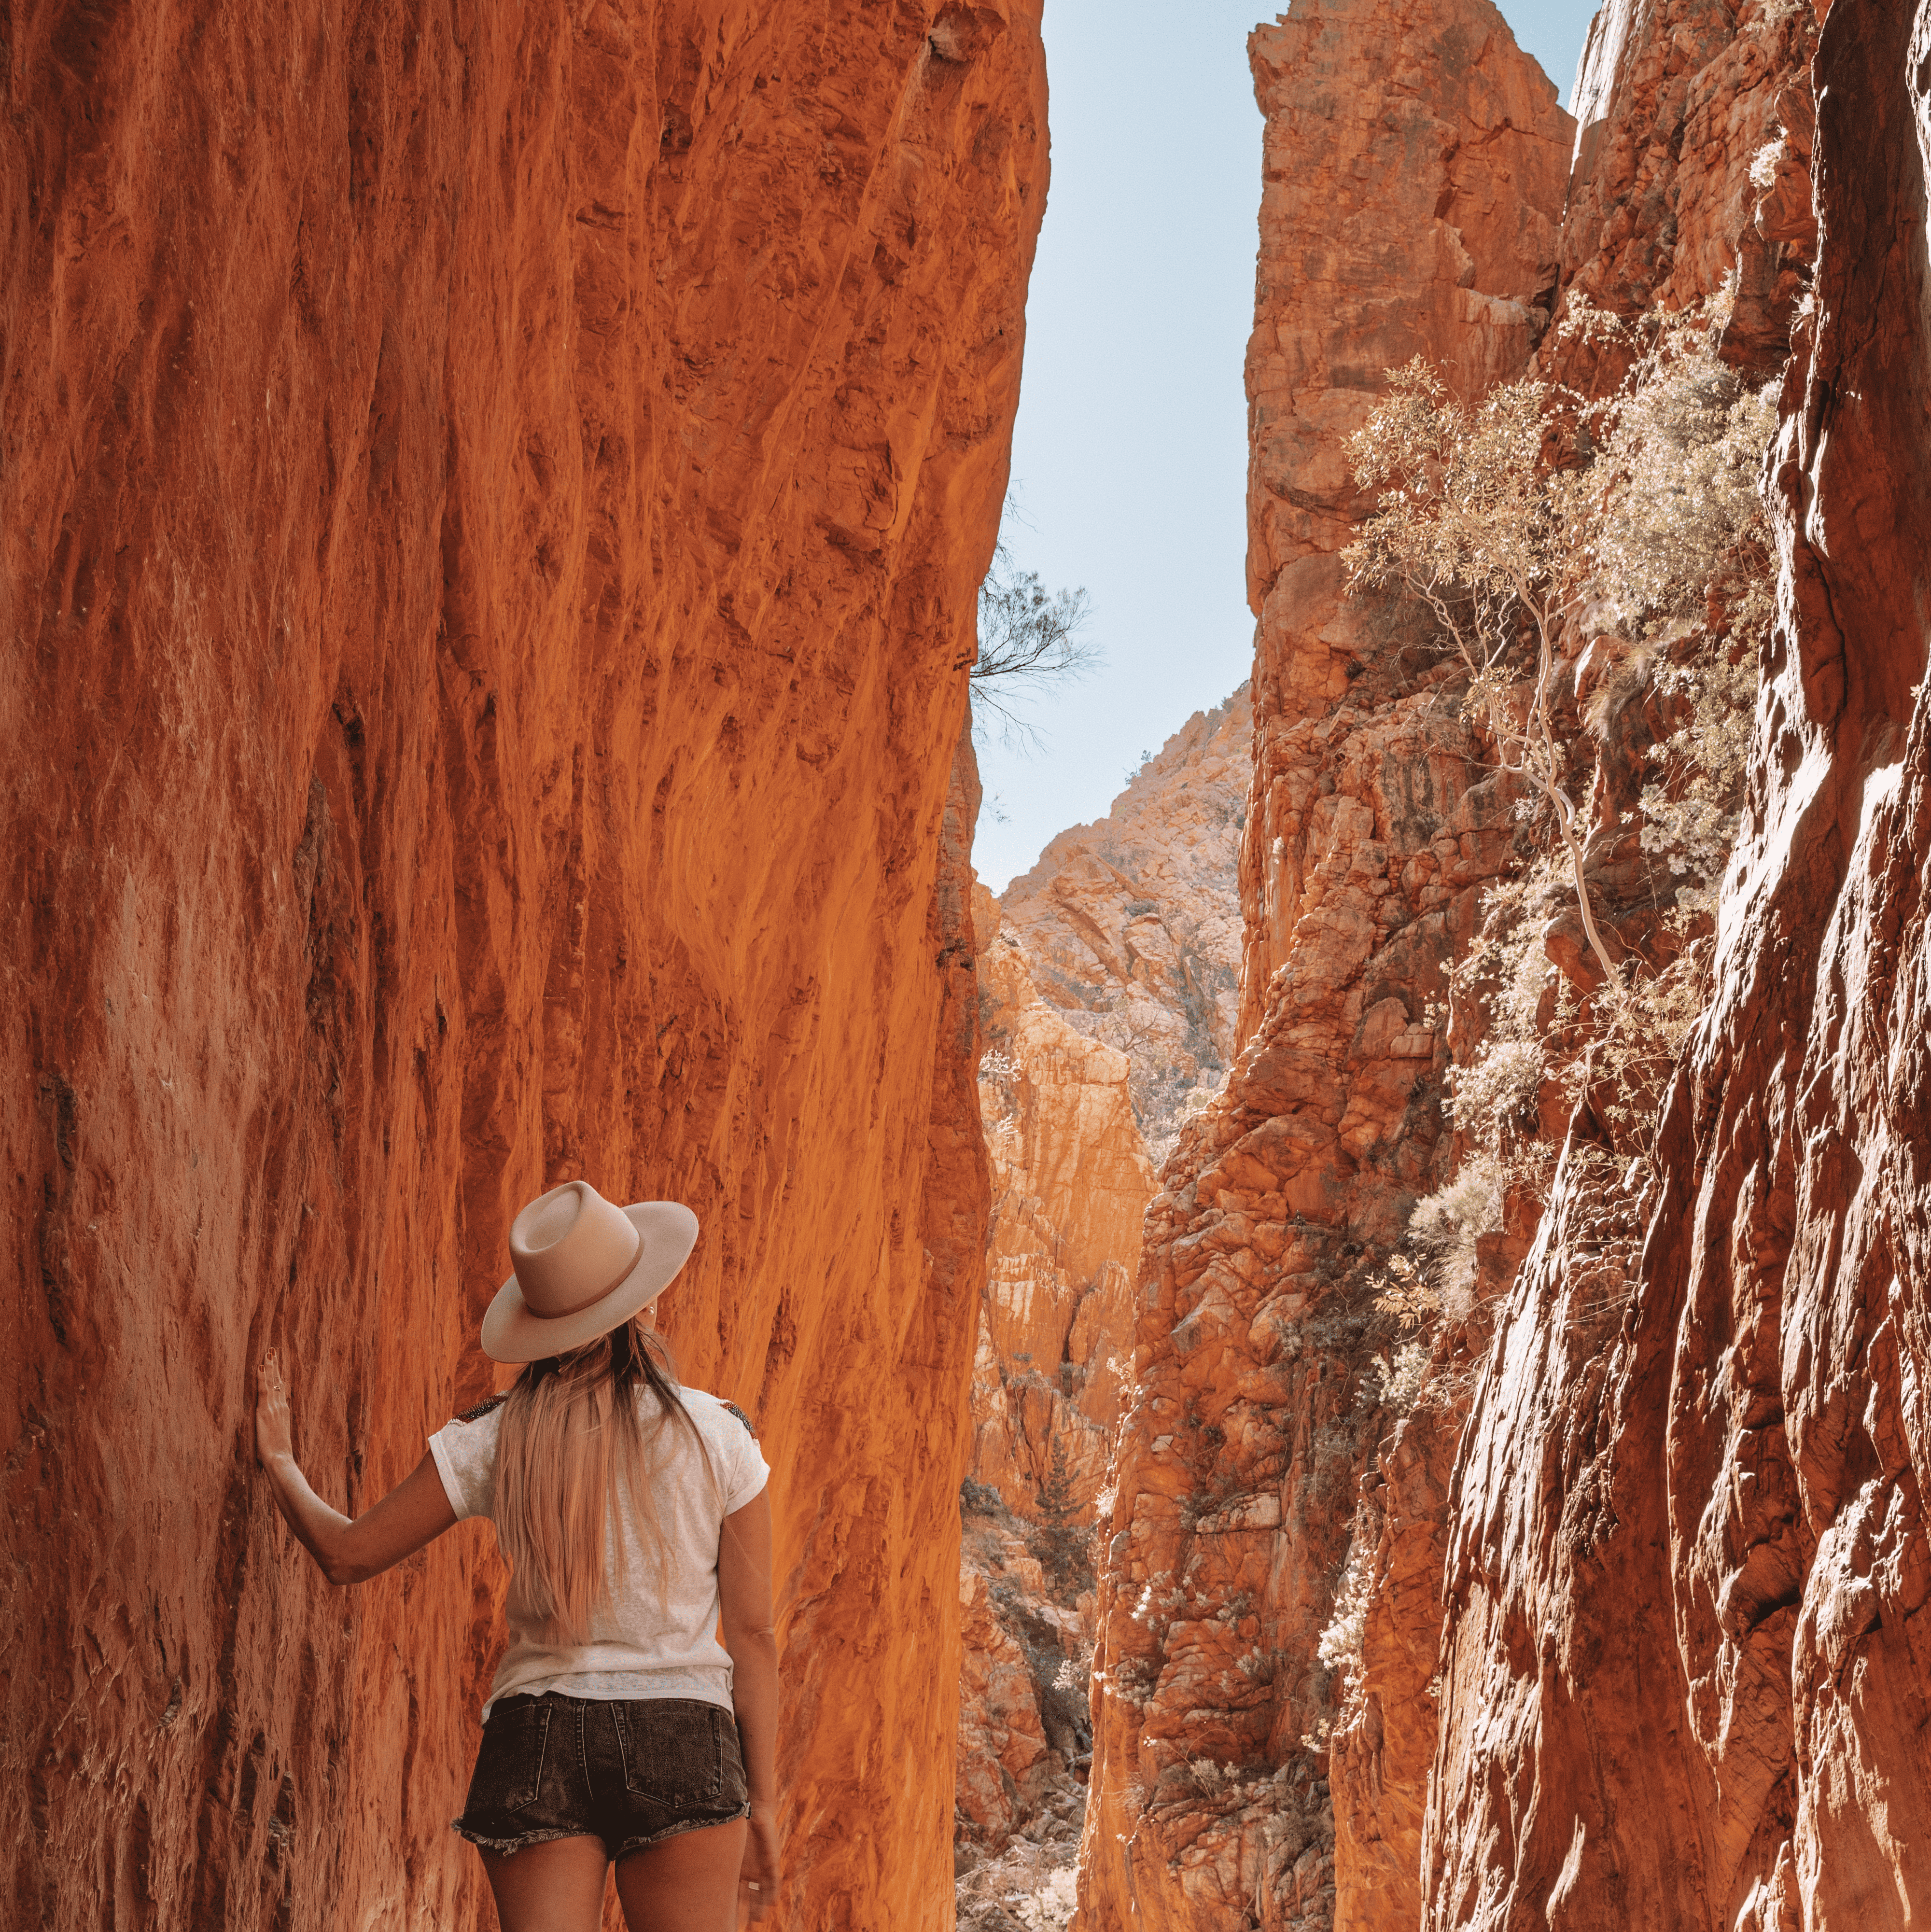 Dani at Standley Chasm - two massive blocks of rock with an opening in the middle where Dani is standing. 